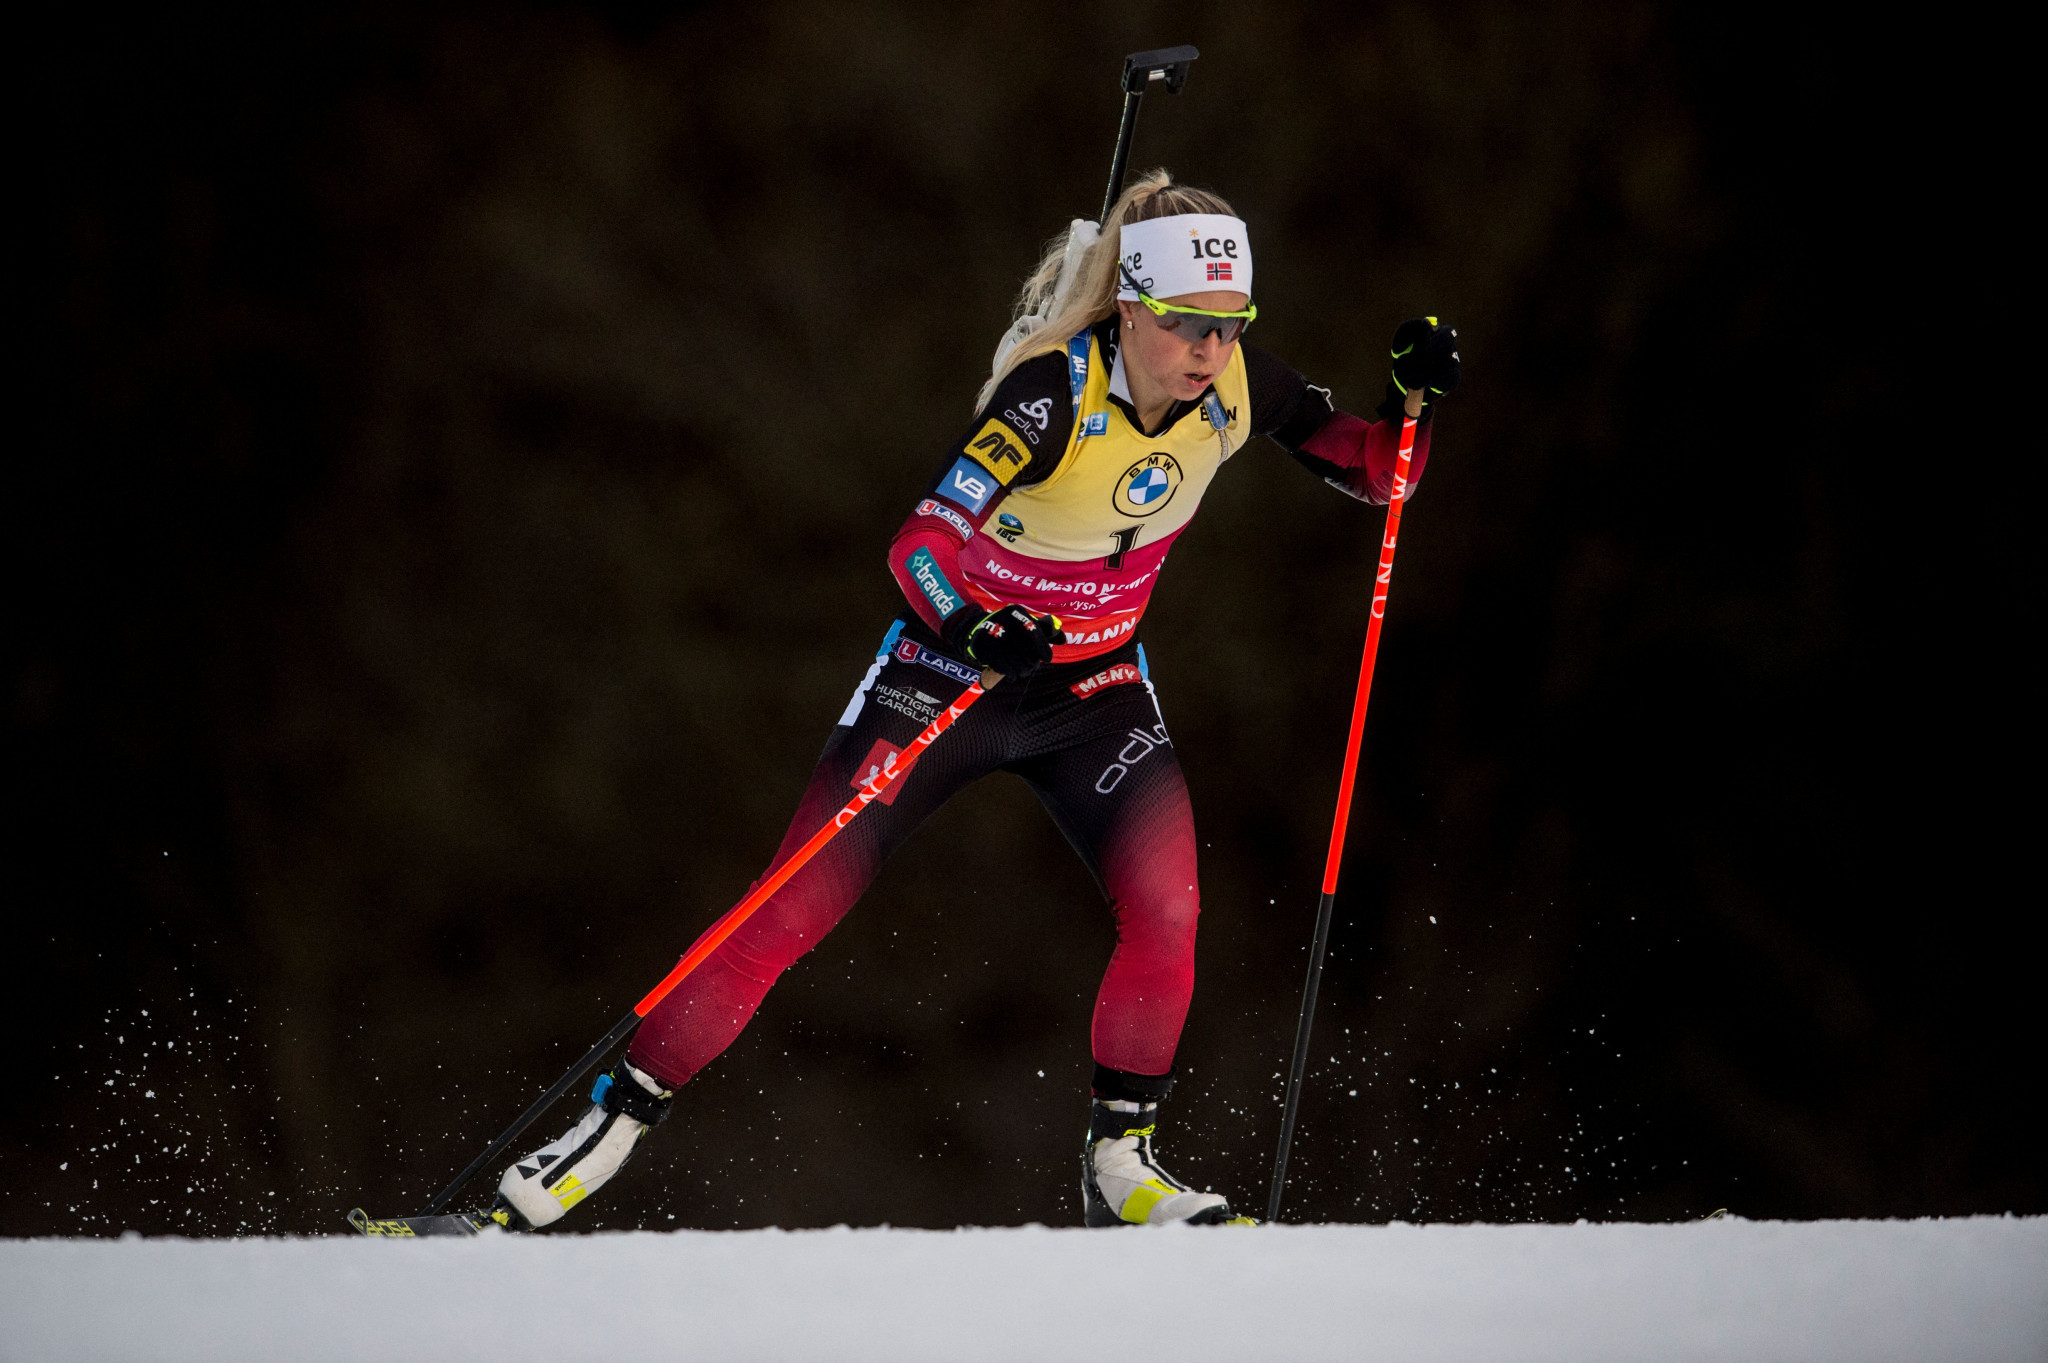 Fillon Maillet and Eckhoff win pursuit races in Nové Město at IBU World Cup